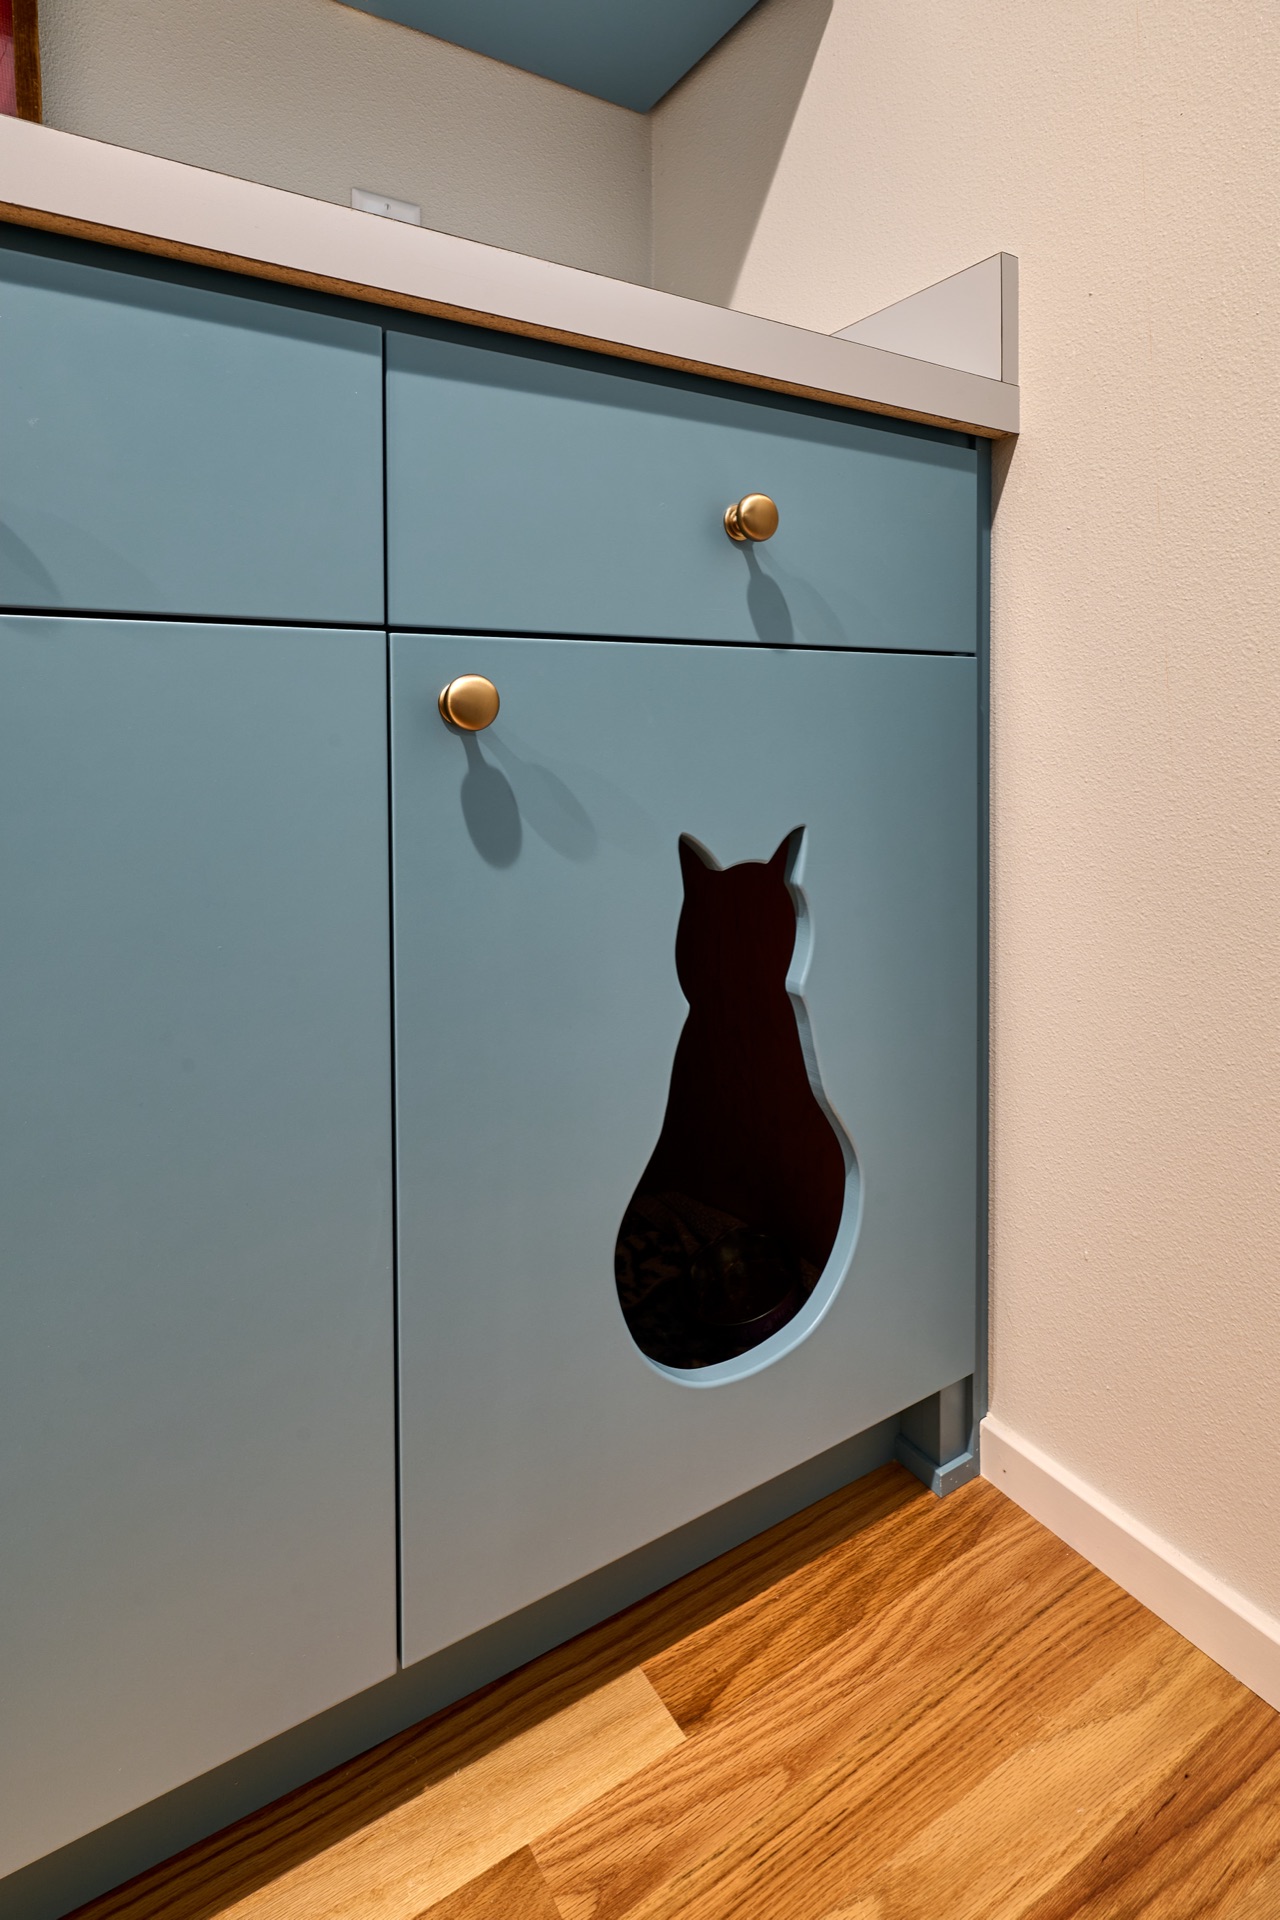 Clever kitty cutout conceals litter in laundry by Powell Construction